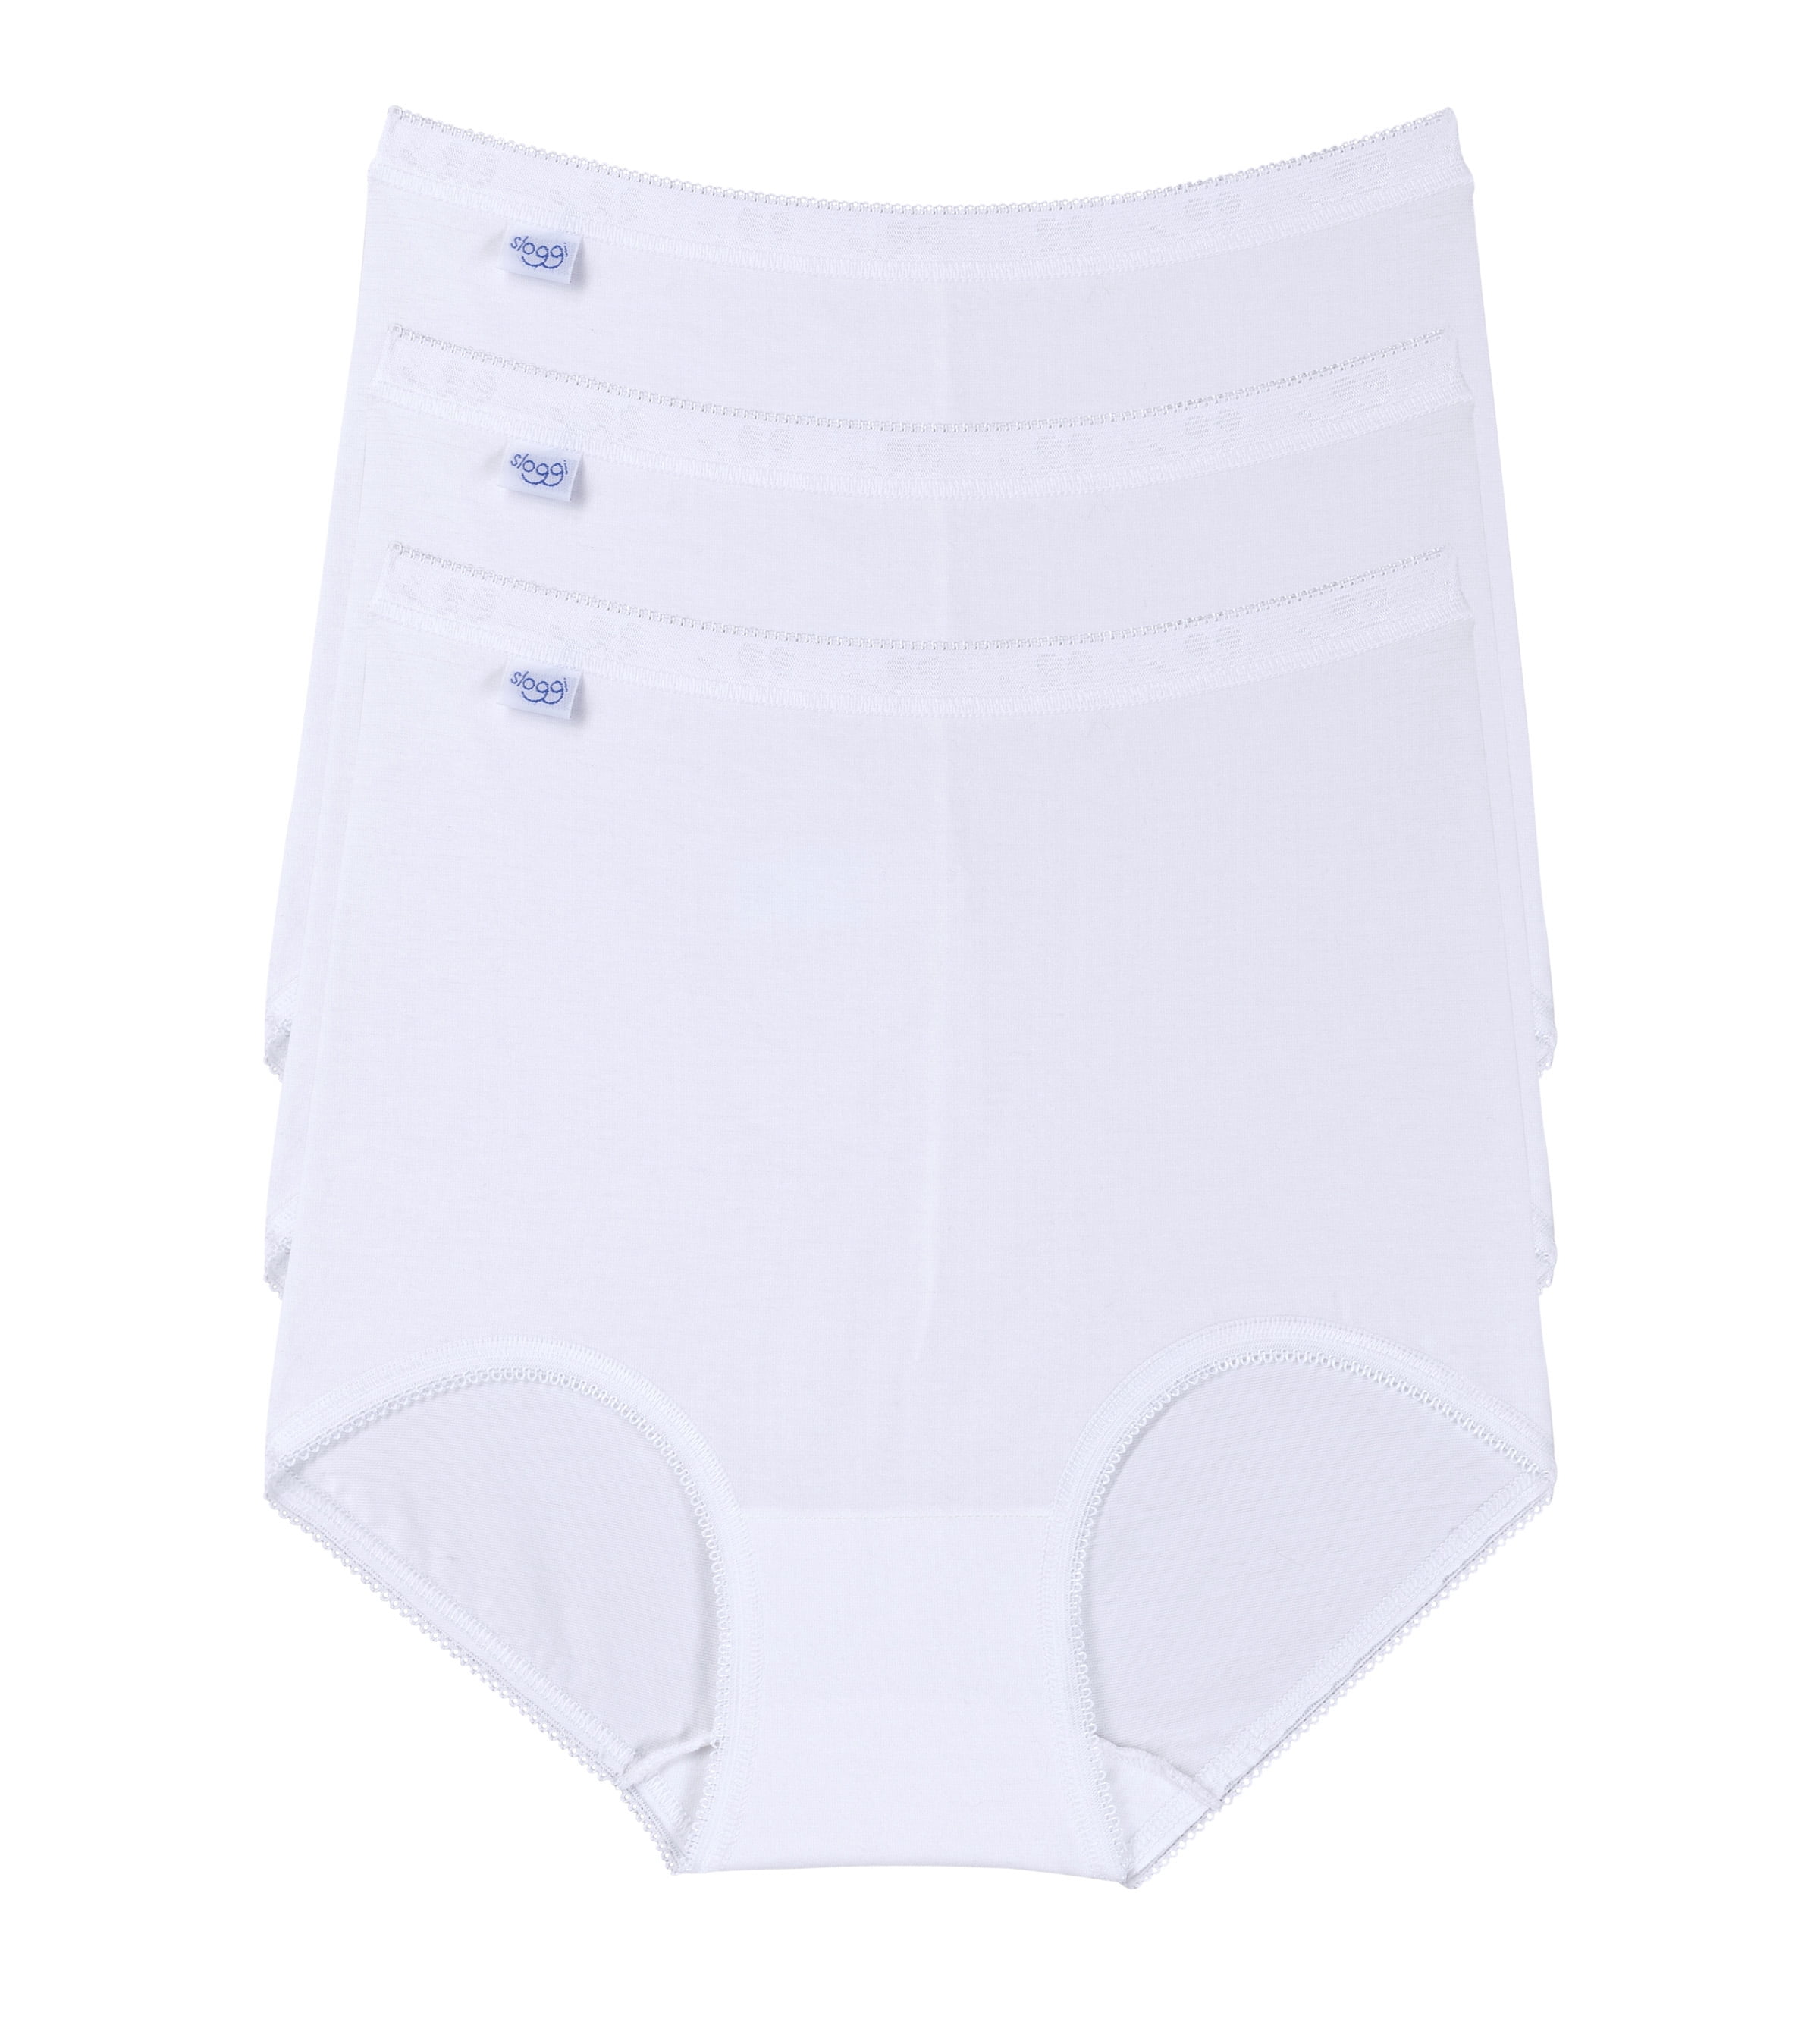 Sloggi High Waisted Control Maxi Lady Seamless Cotton Underwear or Panties ( White, XL, 2 Pack) 